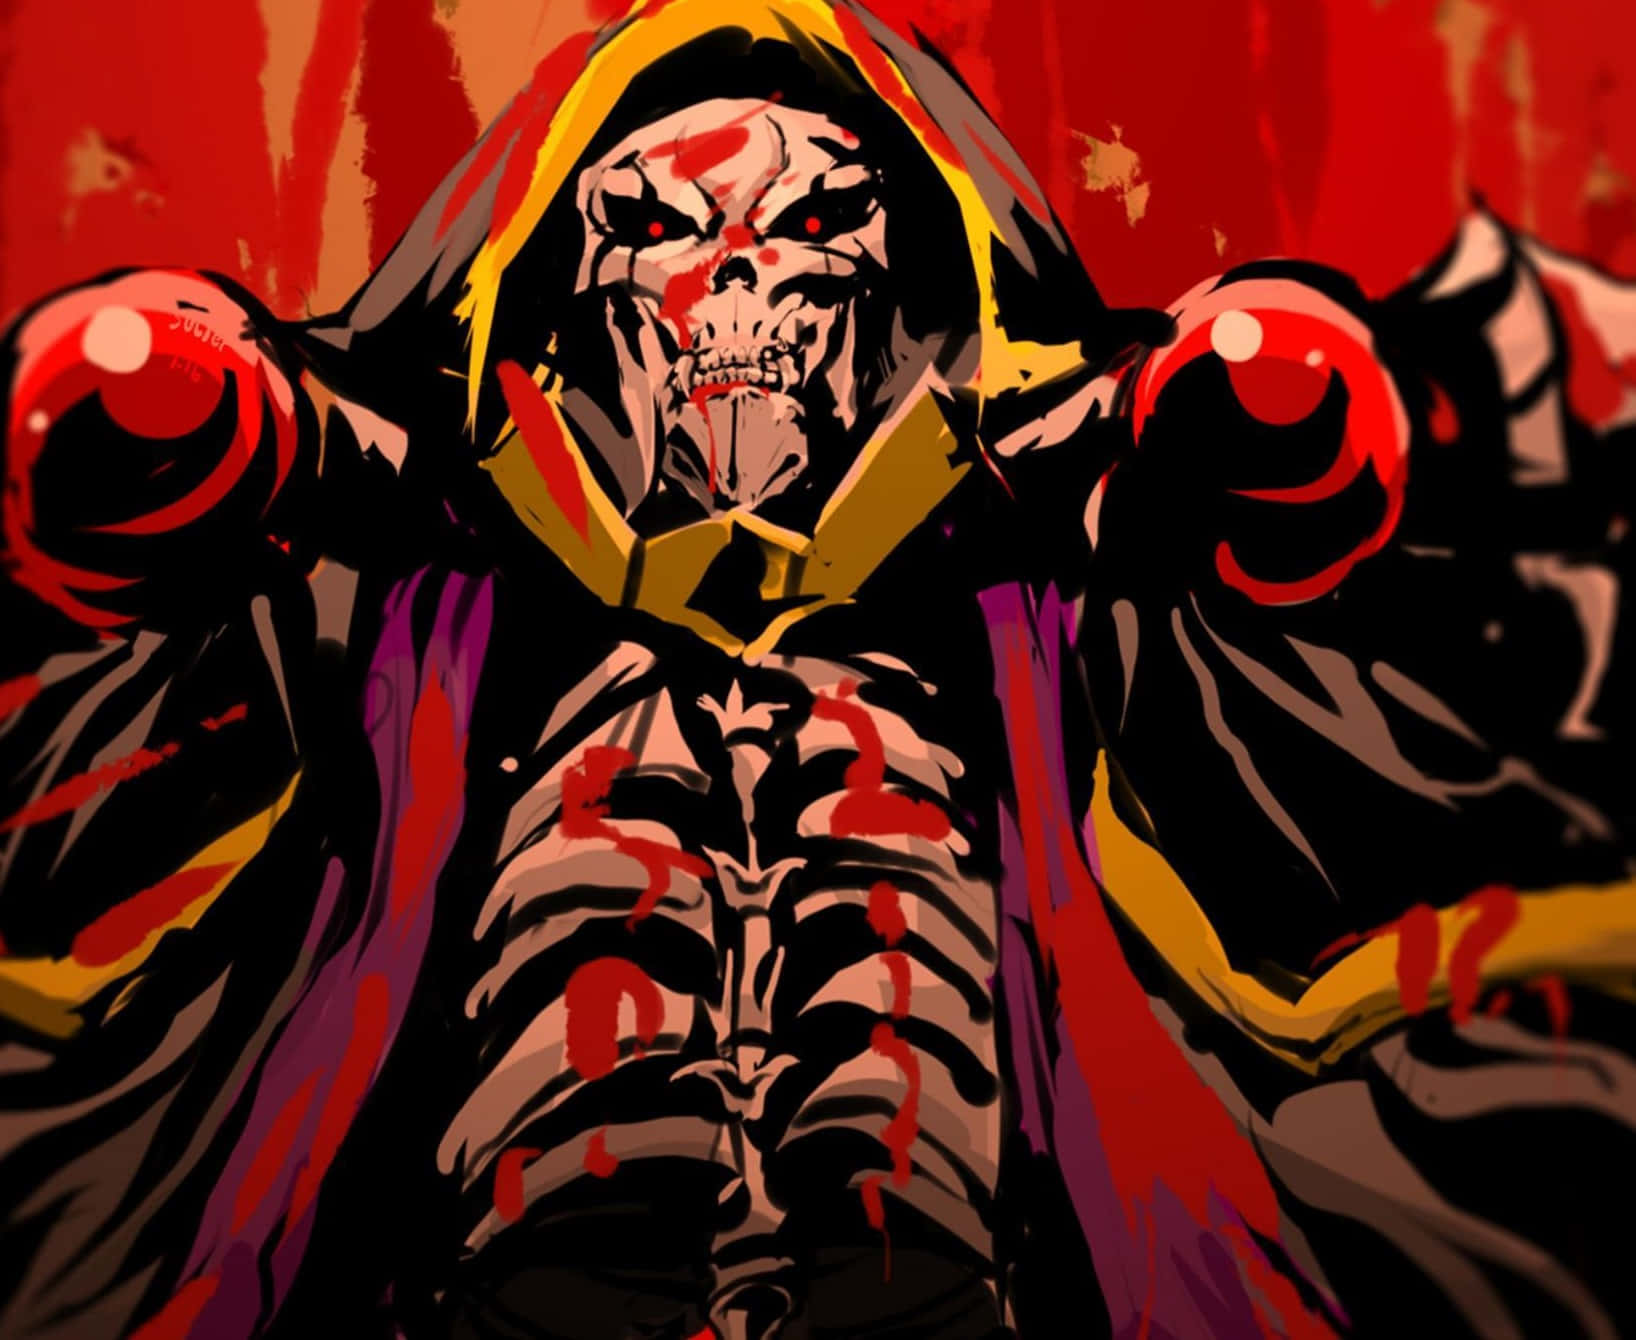 In a world of darkness, adventure awaits in Overlord.